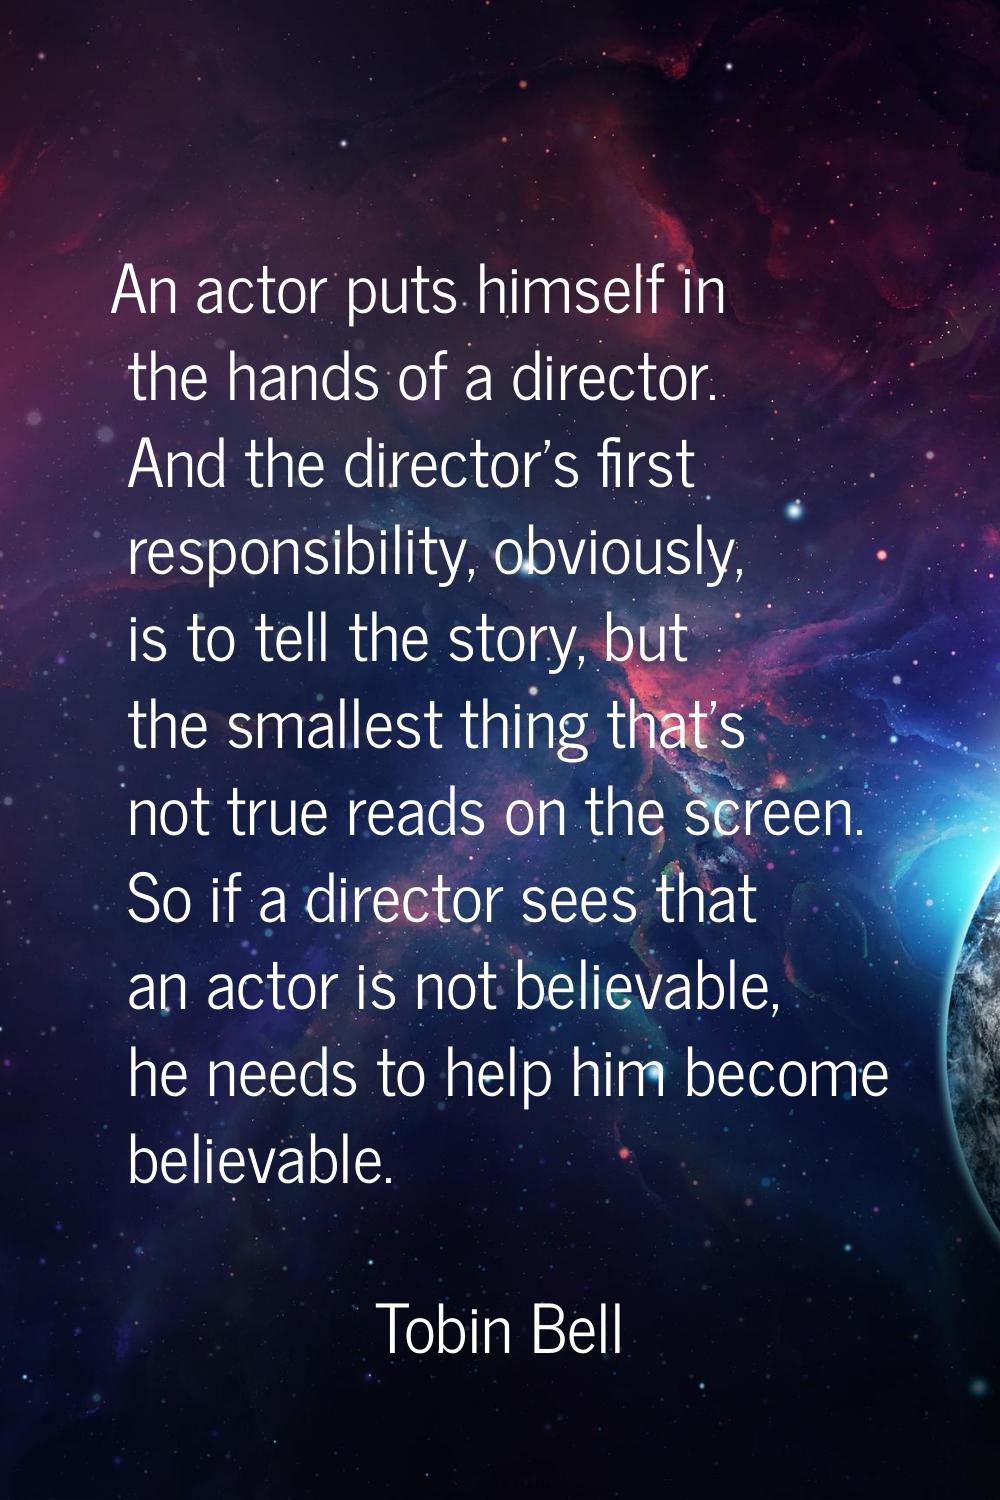 An actor puts himself in the hands of a director. And the director's first responsibility, obviousl